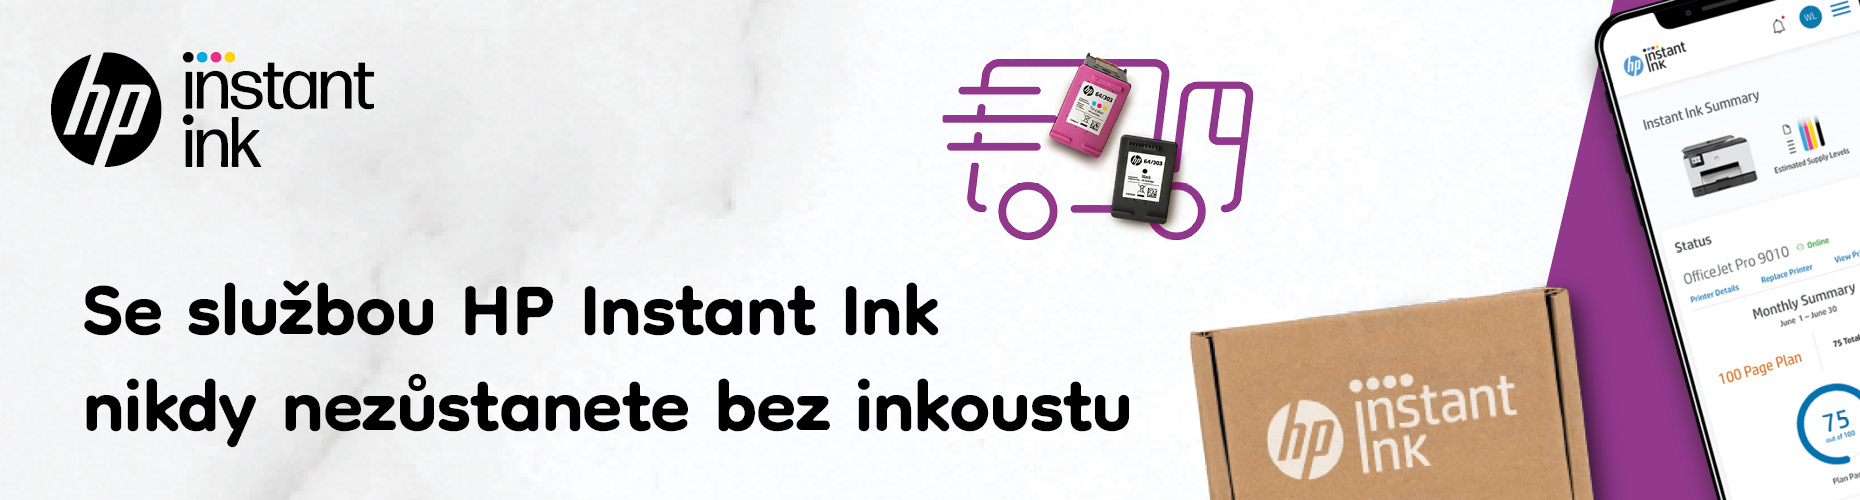 hp instaink